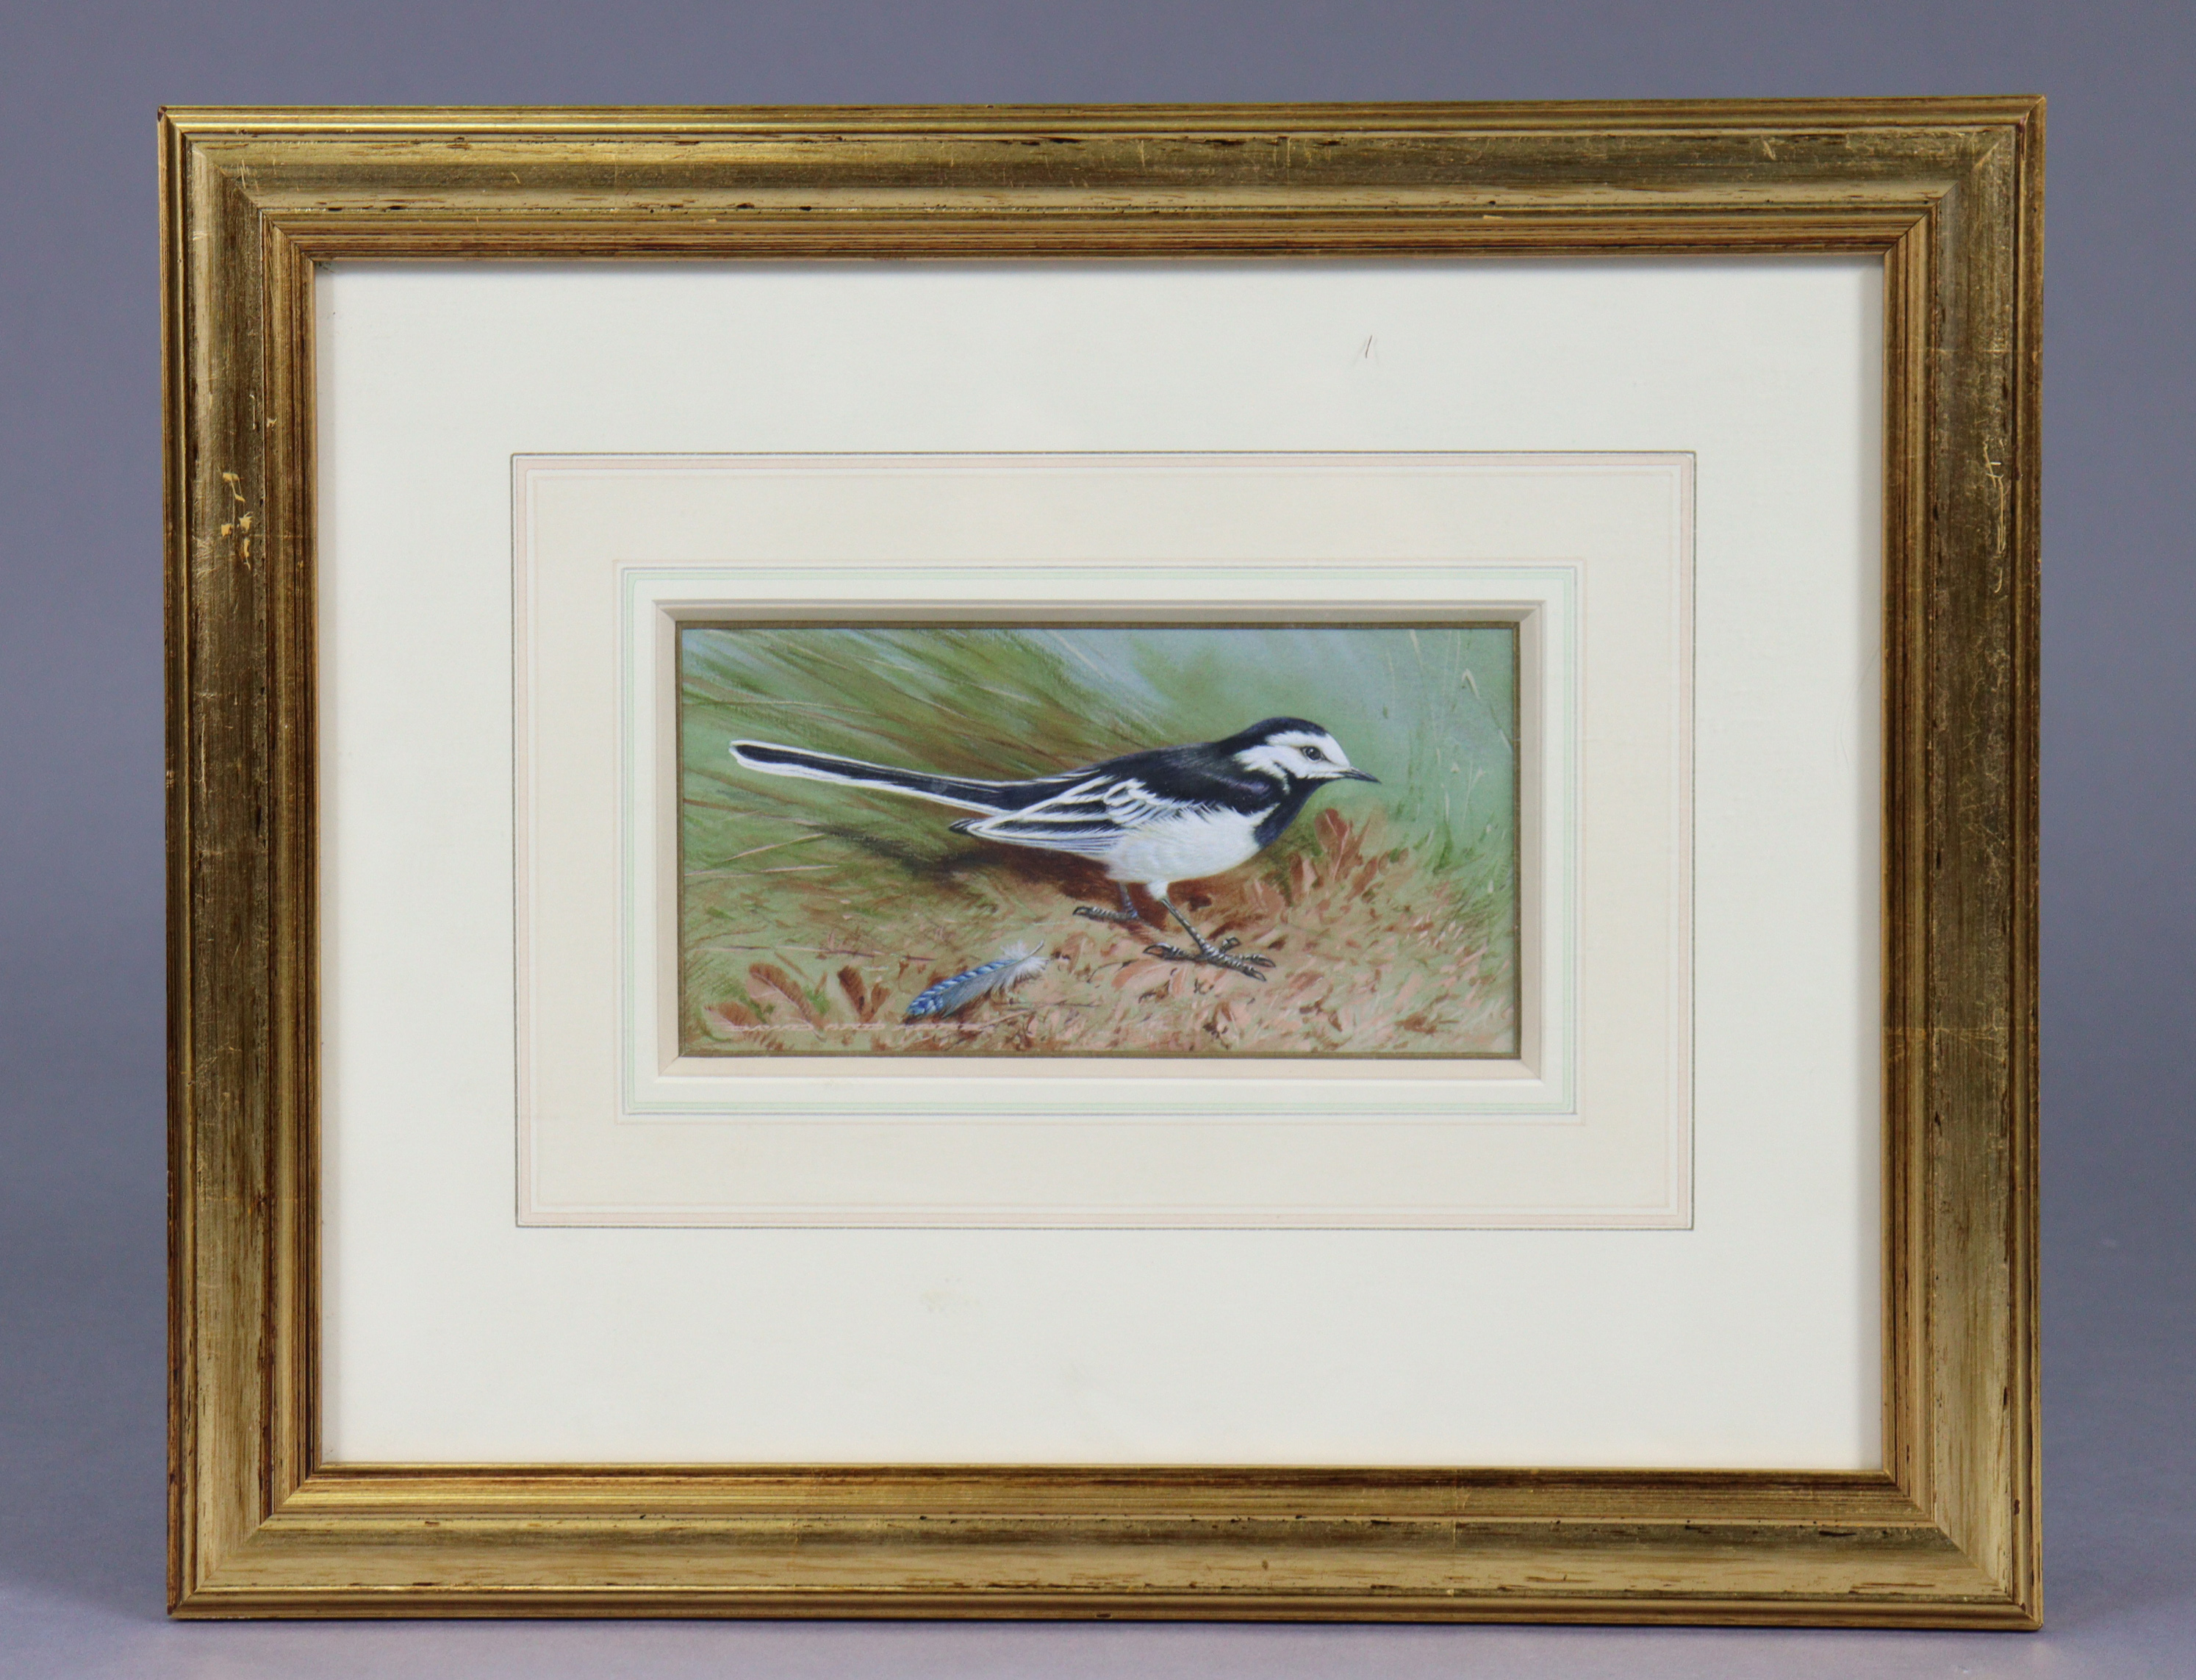 DAVID ORD KERR (b. 1951) “Pied Wagtail”, signed lower left, watercolour: 3¾”x7½”, framed & - Image 2 of 4